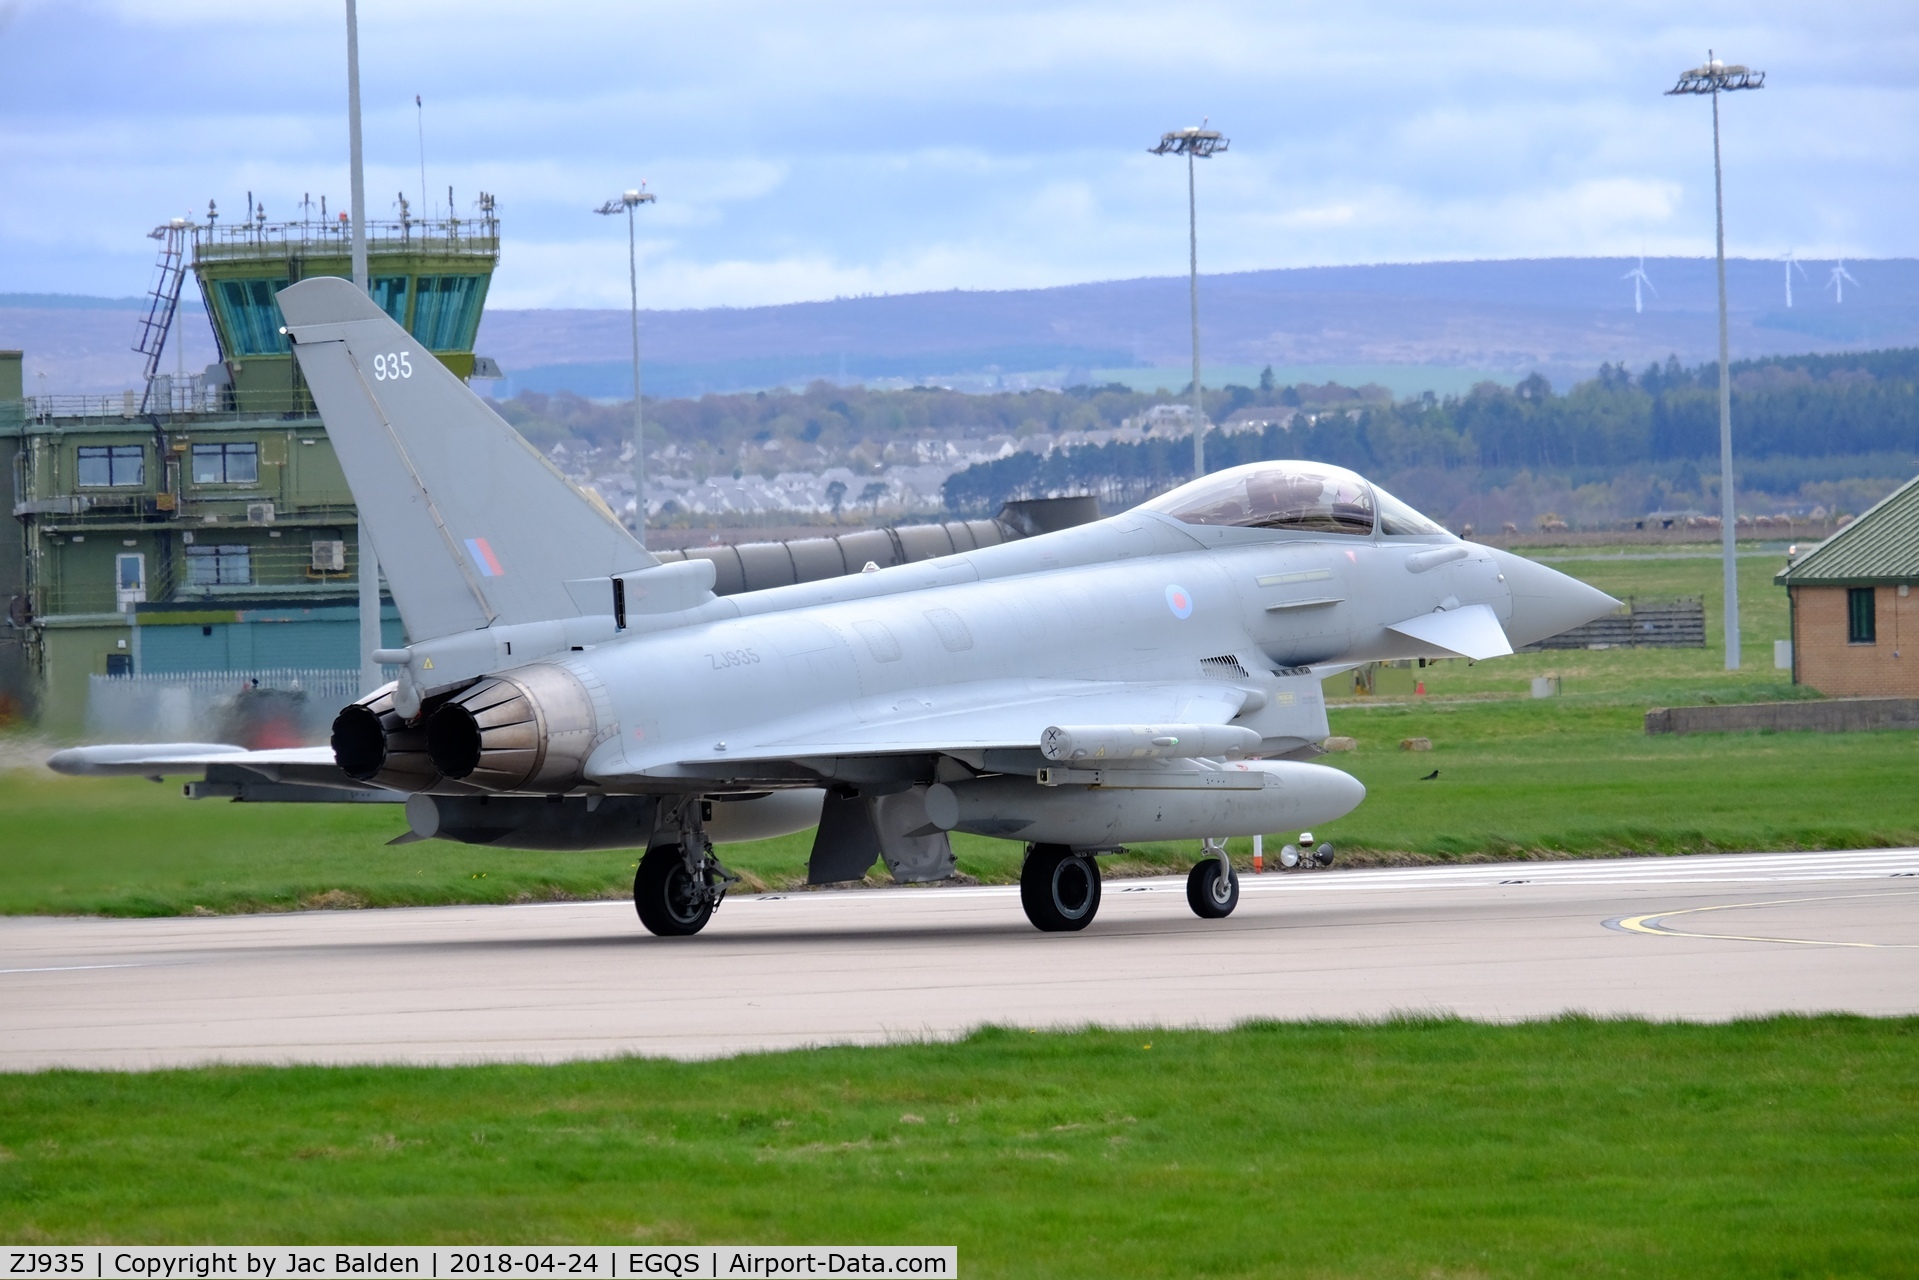 ZJ935, 2006 Eurofighter EF-2000 Typhoon FGR4 C/N 0115/BS026, ZJ935 leaving Lossiemouth  as part of II sqn for Baltic airpolicing mission in Romania